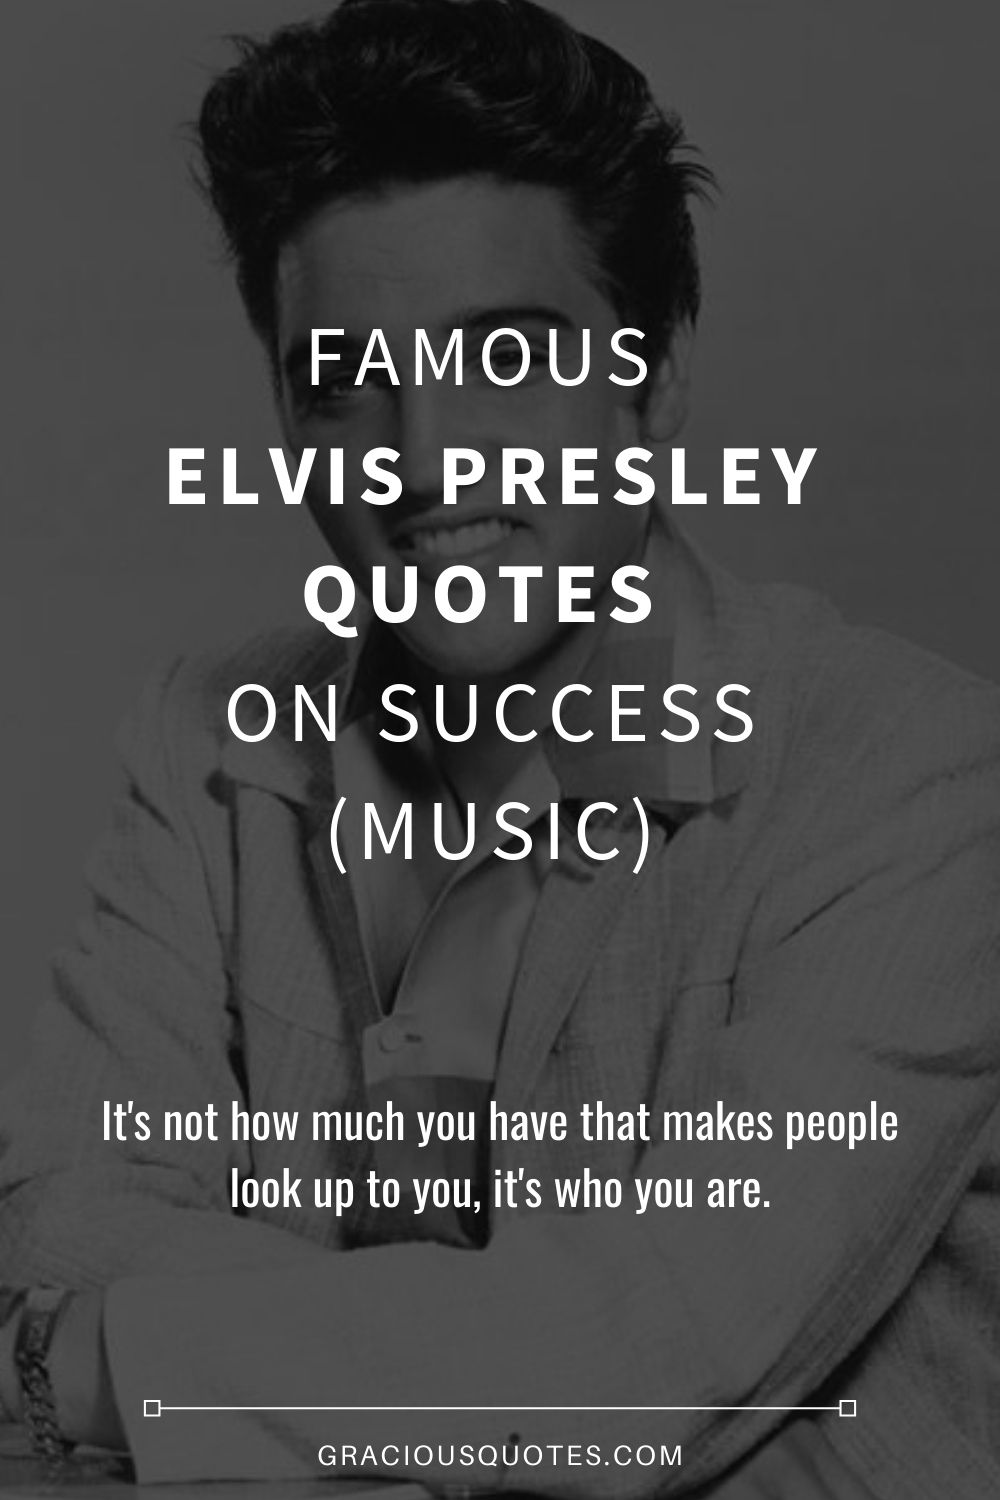 Famous Elvis Presley Quotes on Success (MUSIC) - Gracious Quotes